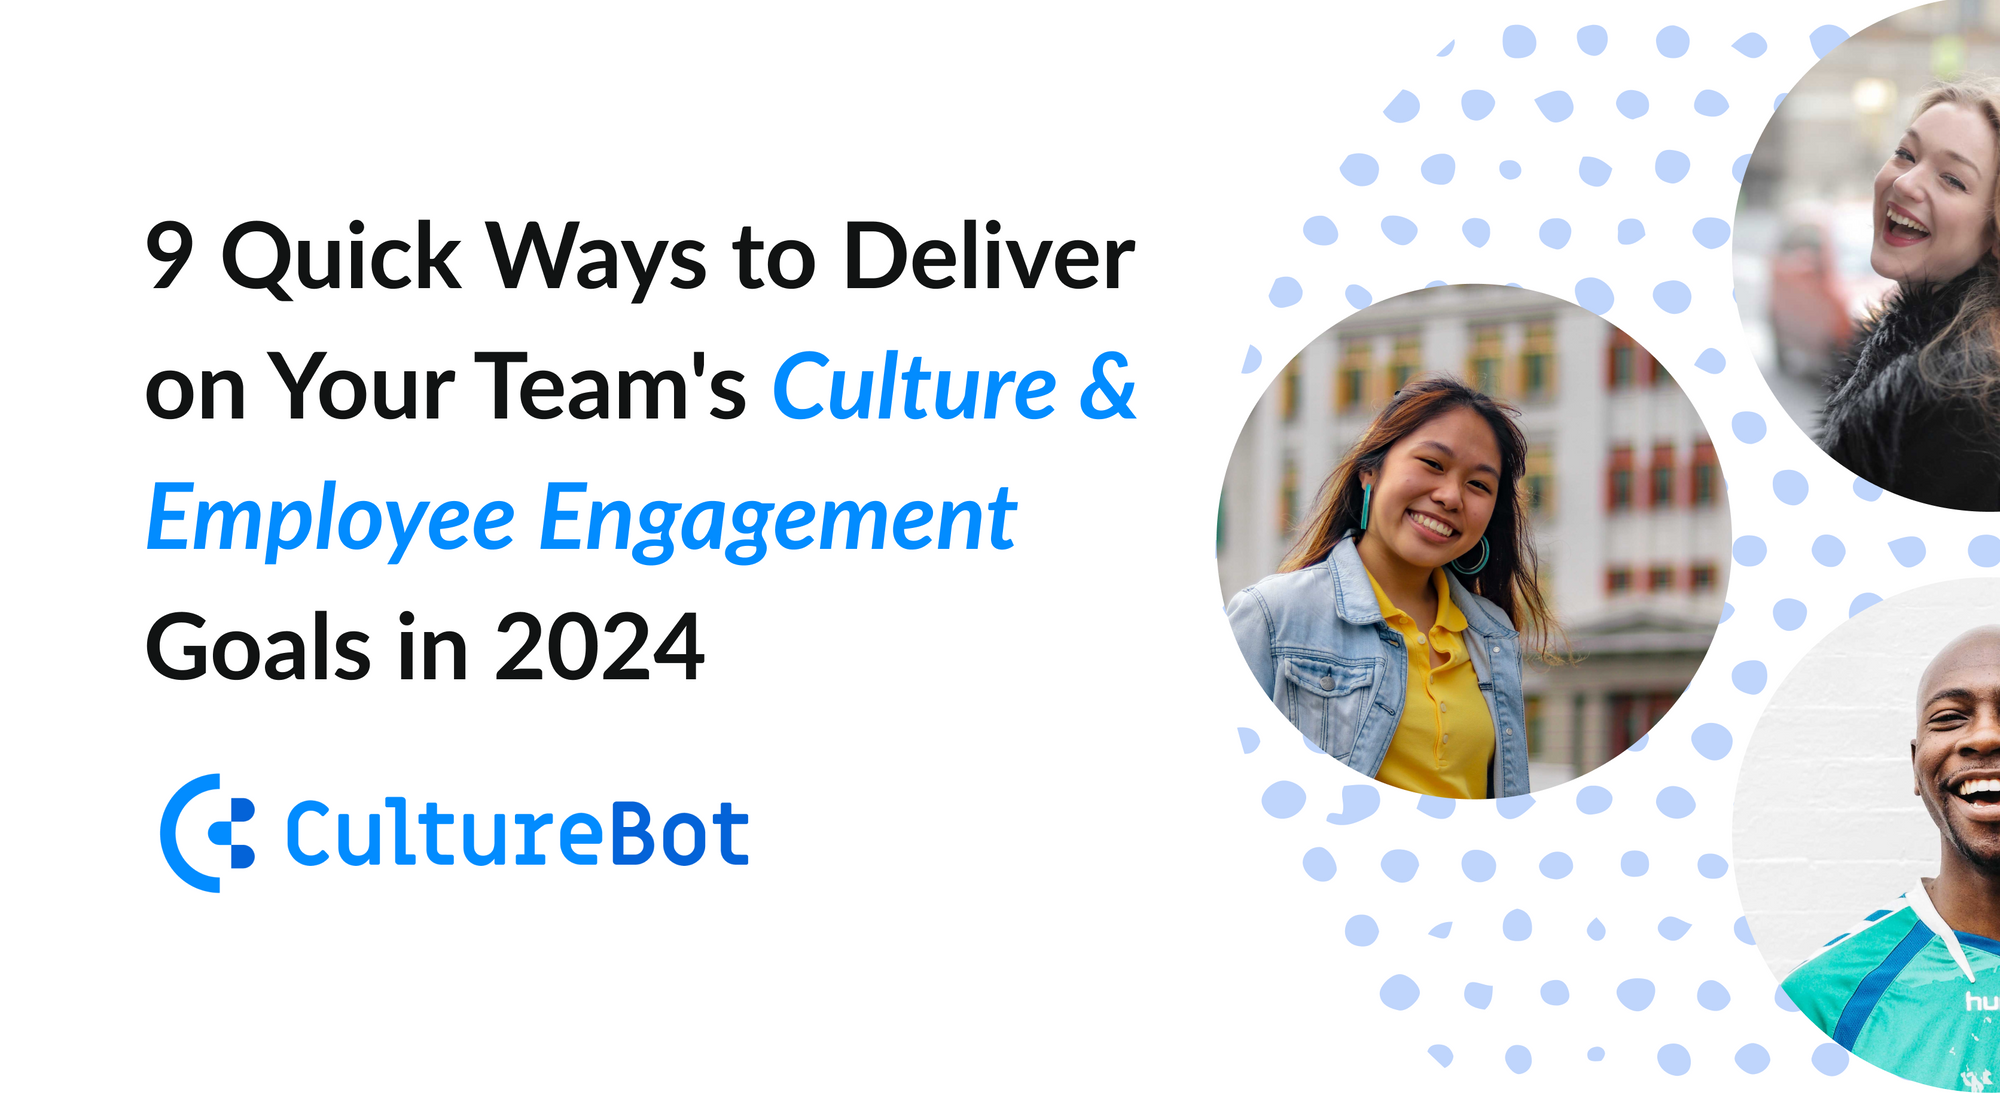 9 Quick Ways to Deliver on Your Team's Culture & Employee Engagement Goals in 2024